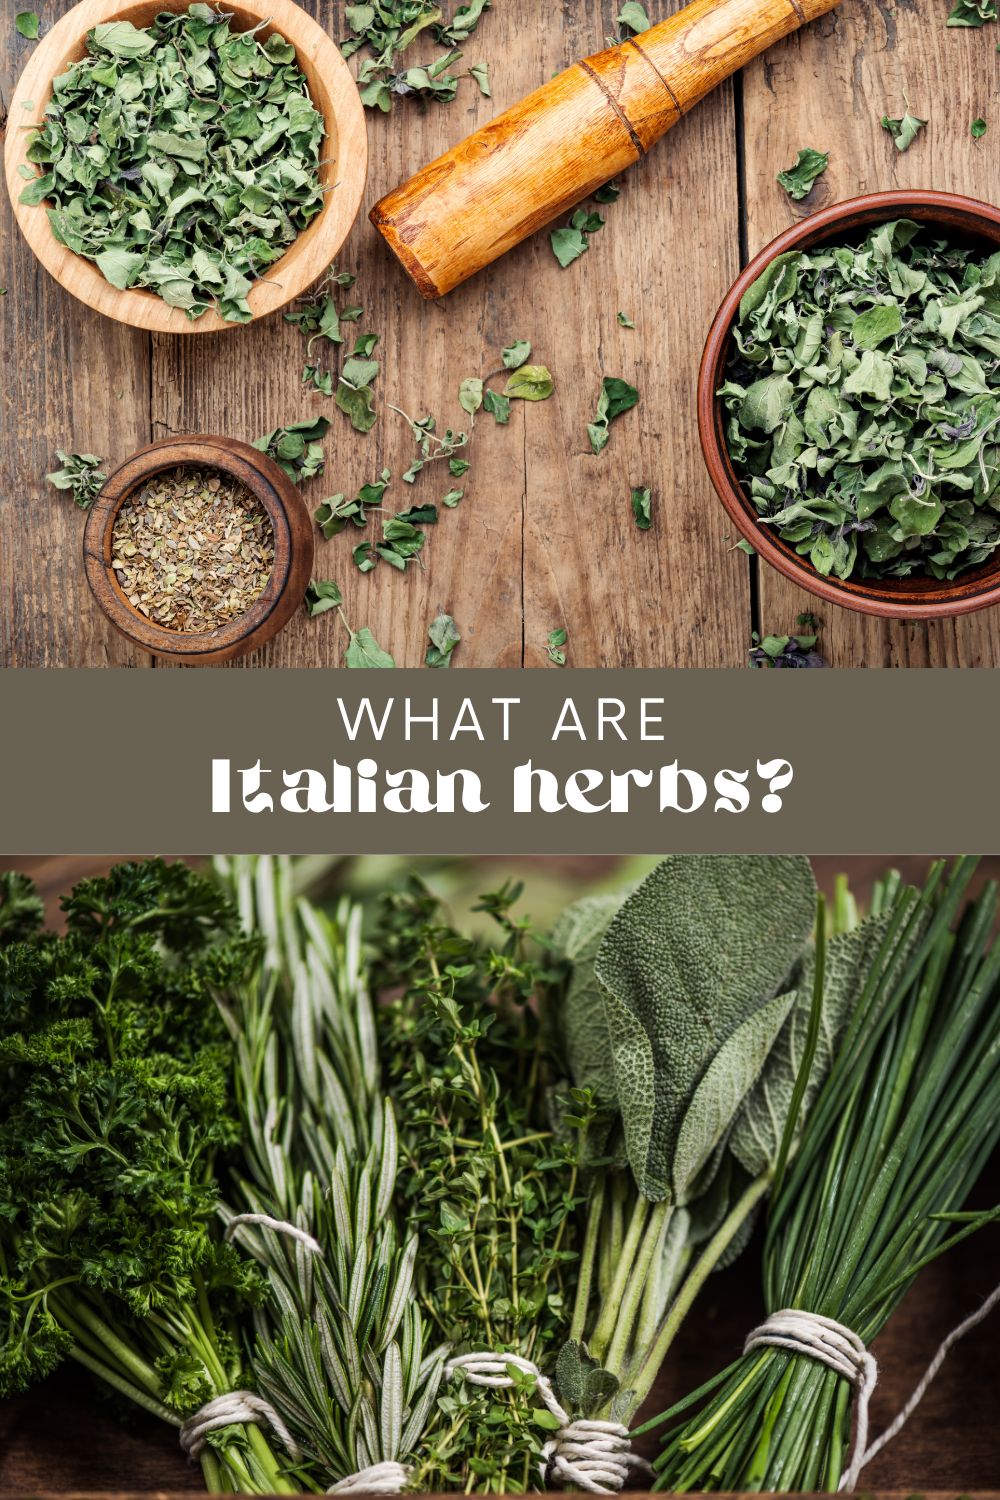 Full of aromatic natural goodness, Italian herbs offer a unique and delicious flavor to any dish. But while many of us have this wonderful seasoning mix on our spice rack, what exactly do Italian herbs consist of?